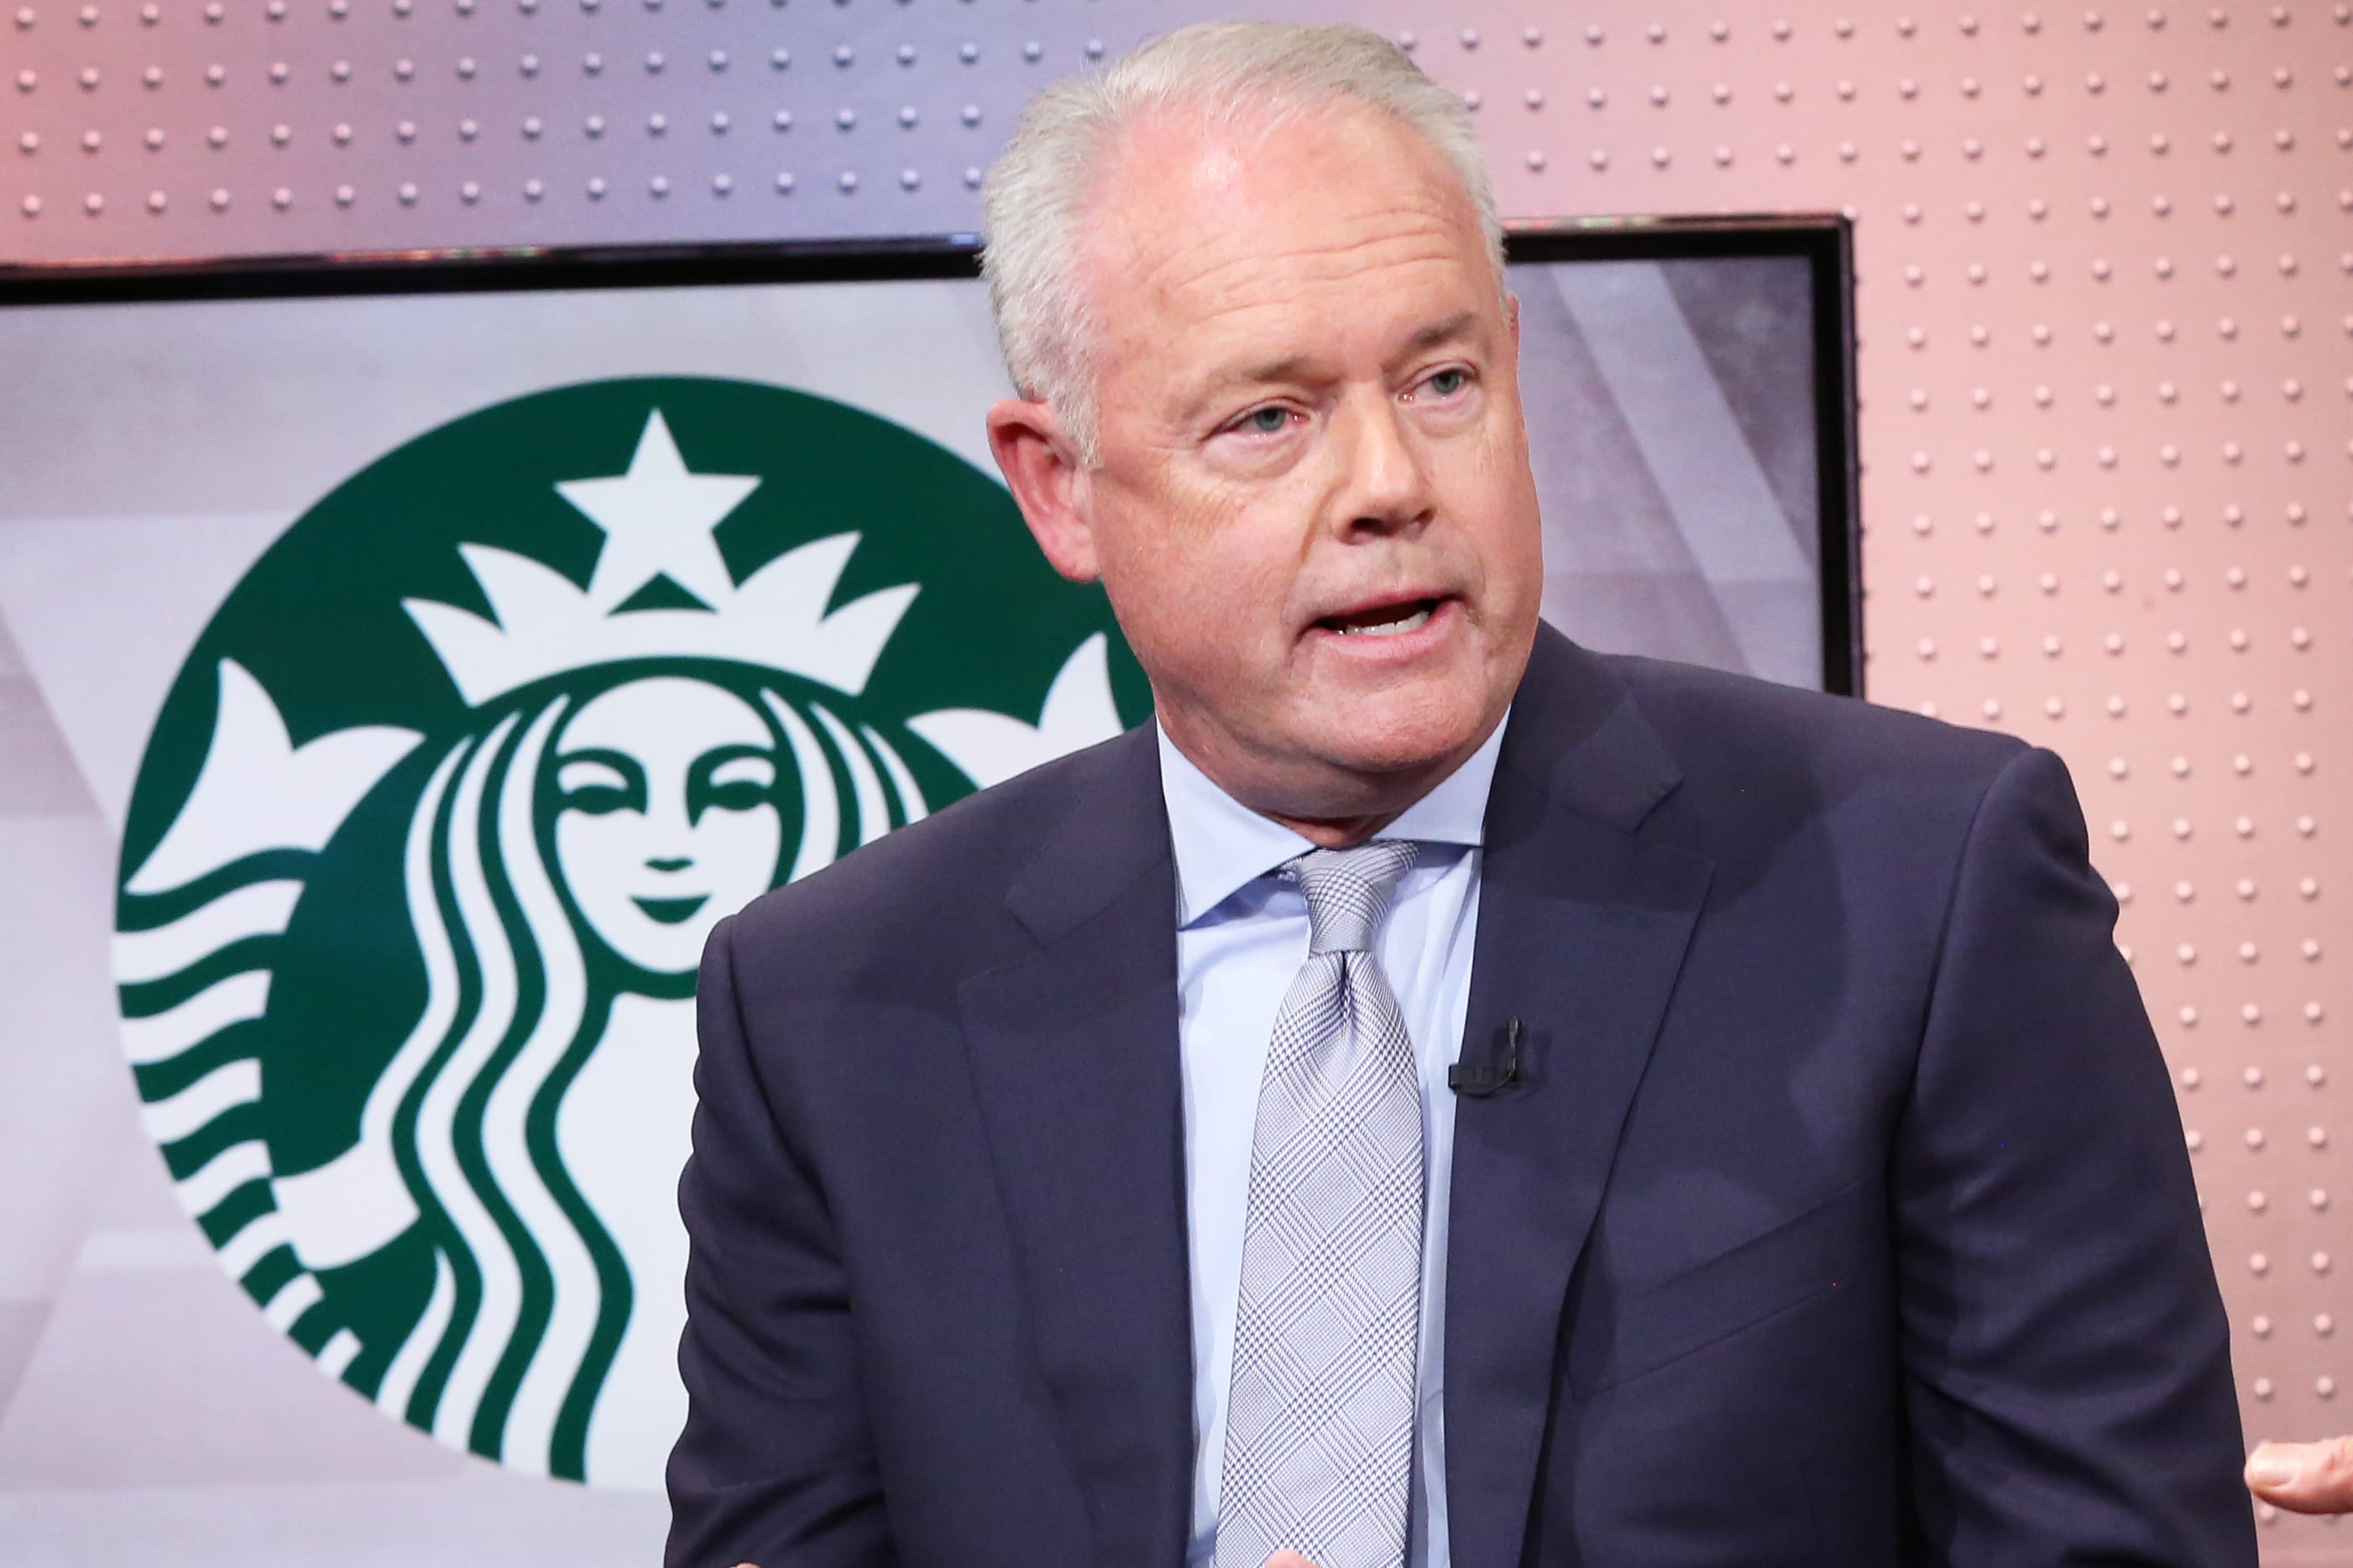 Starbucks to boost workers' mental health benefits, reduce 'remedial tasks'